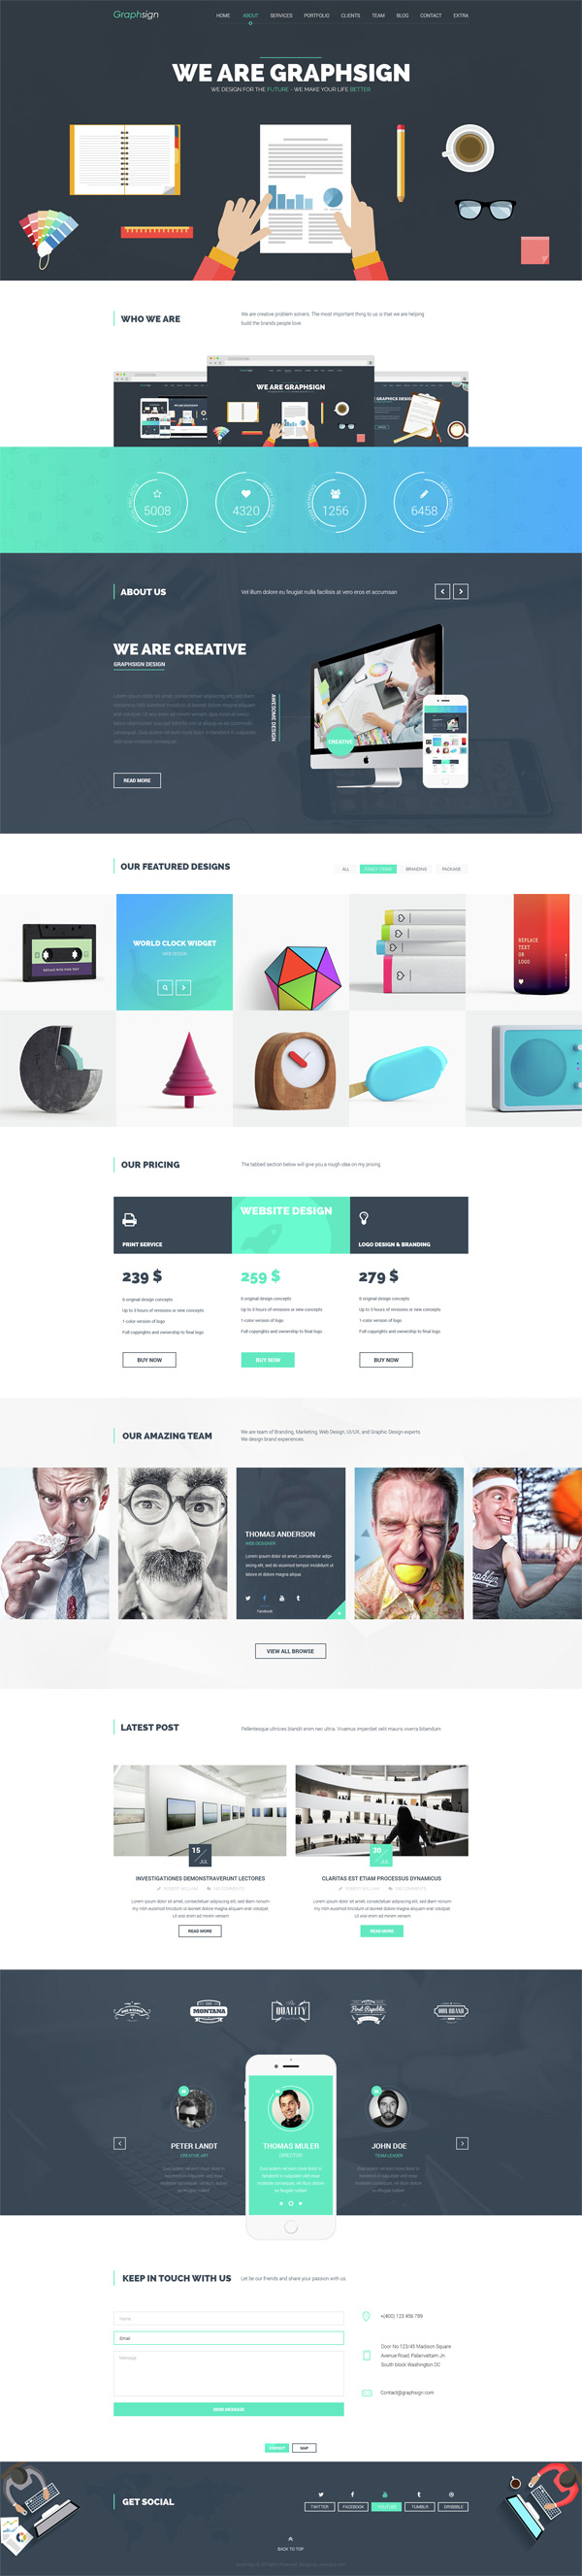 Graphsign - Creative One Page Multi-Purpose WP Theme